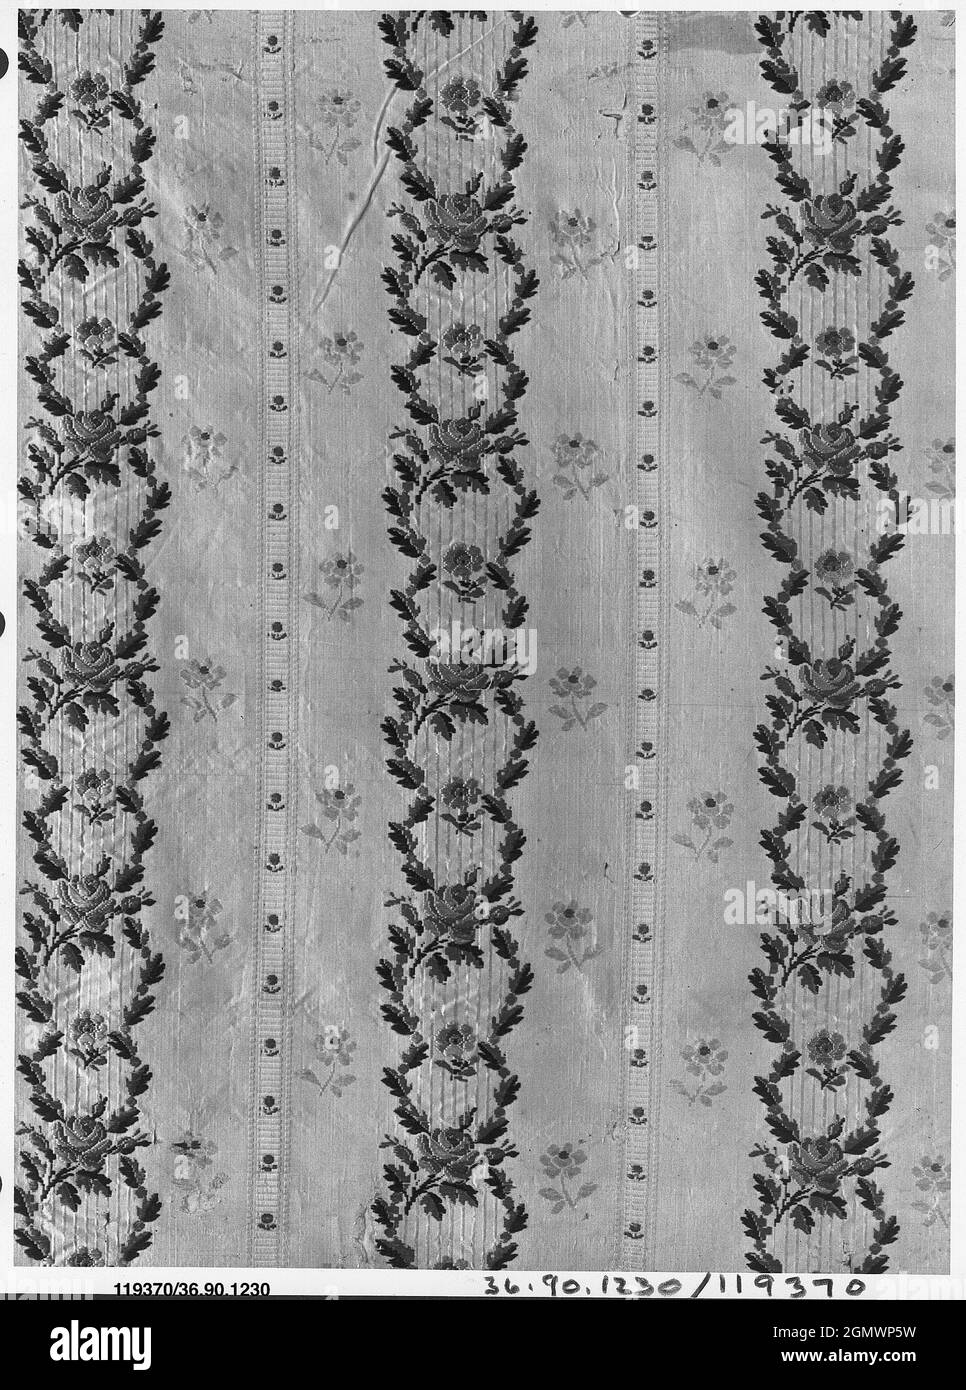 Piece. Date: 1780-90; Culture: French; Medium: Silk; Dimensions: L. 26 x W. 19 inches; Classification: Textiles-Woven Stock Photo